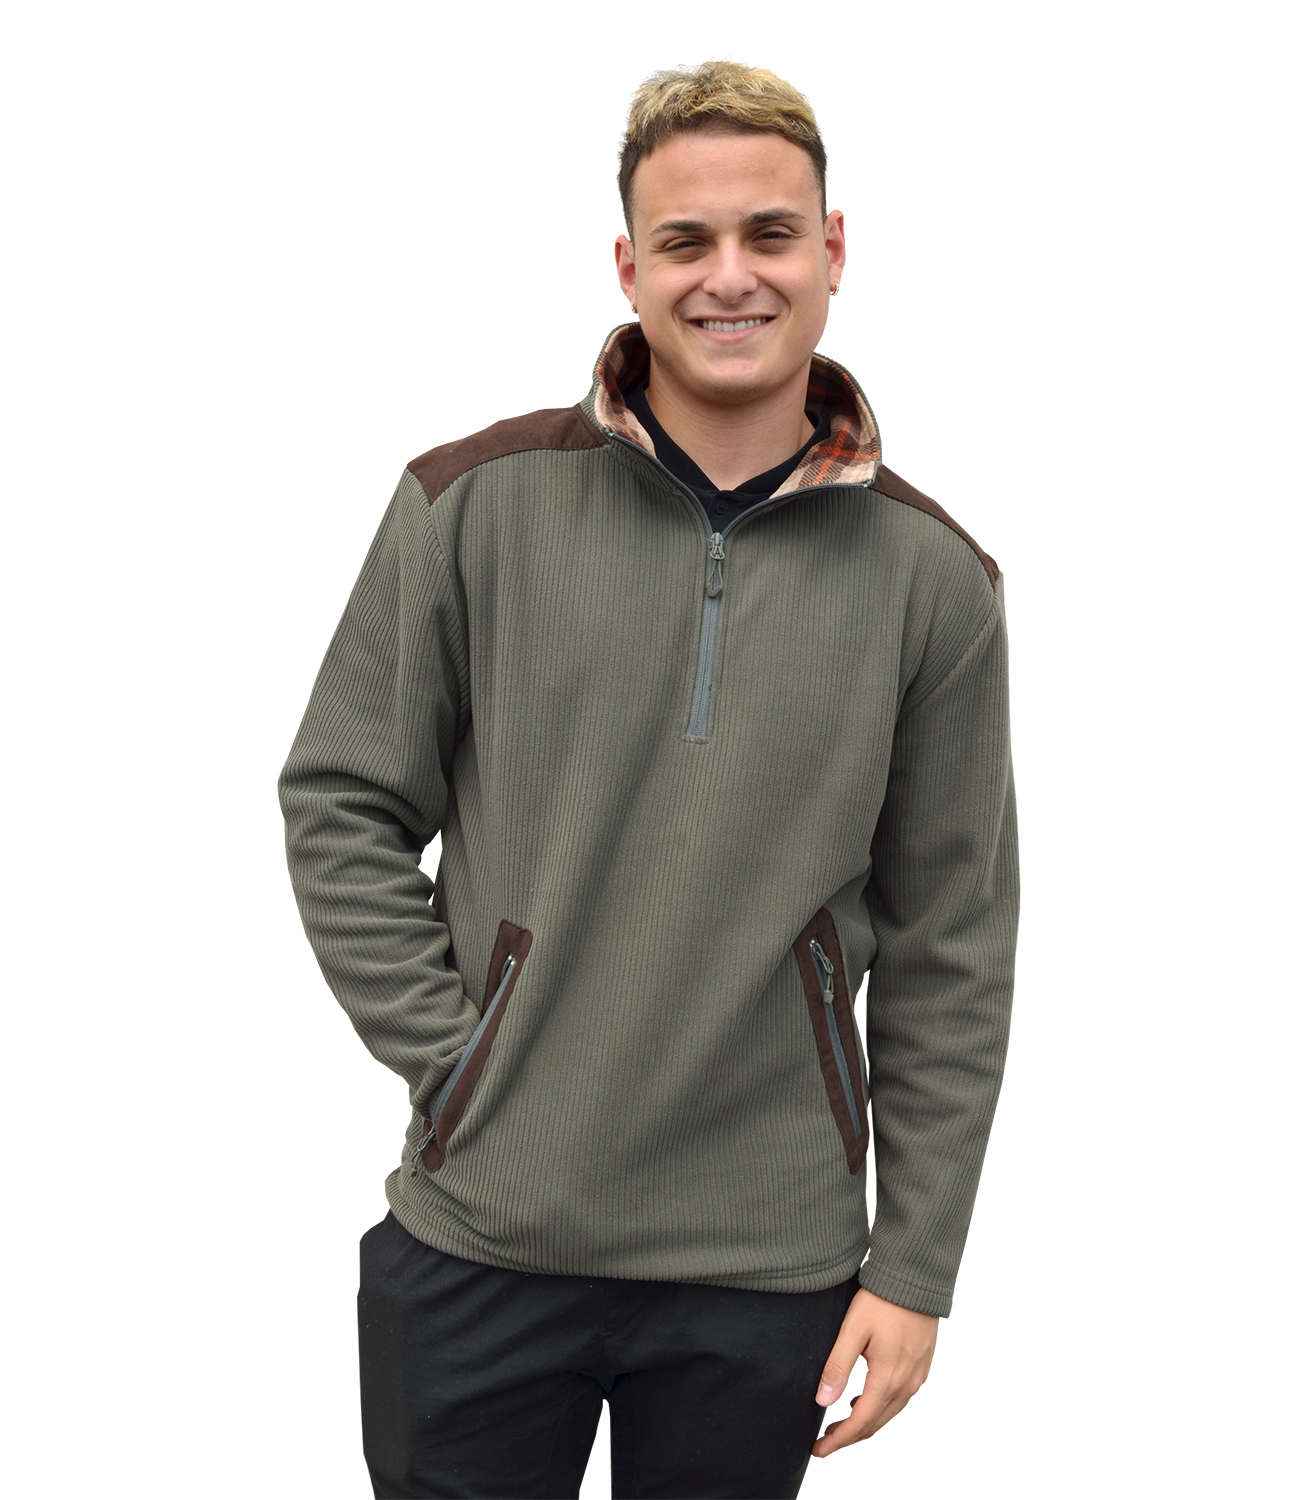 Renegade club fleece half zip pullover, wholesale blanks for embroidery brand, corduroy, plaid, olive, brown